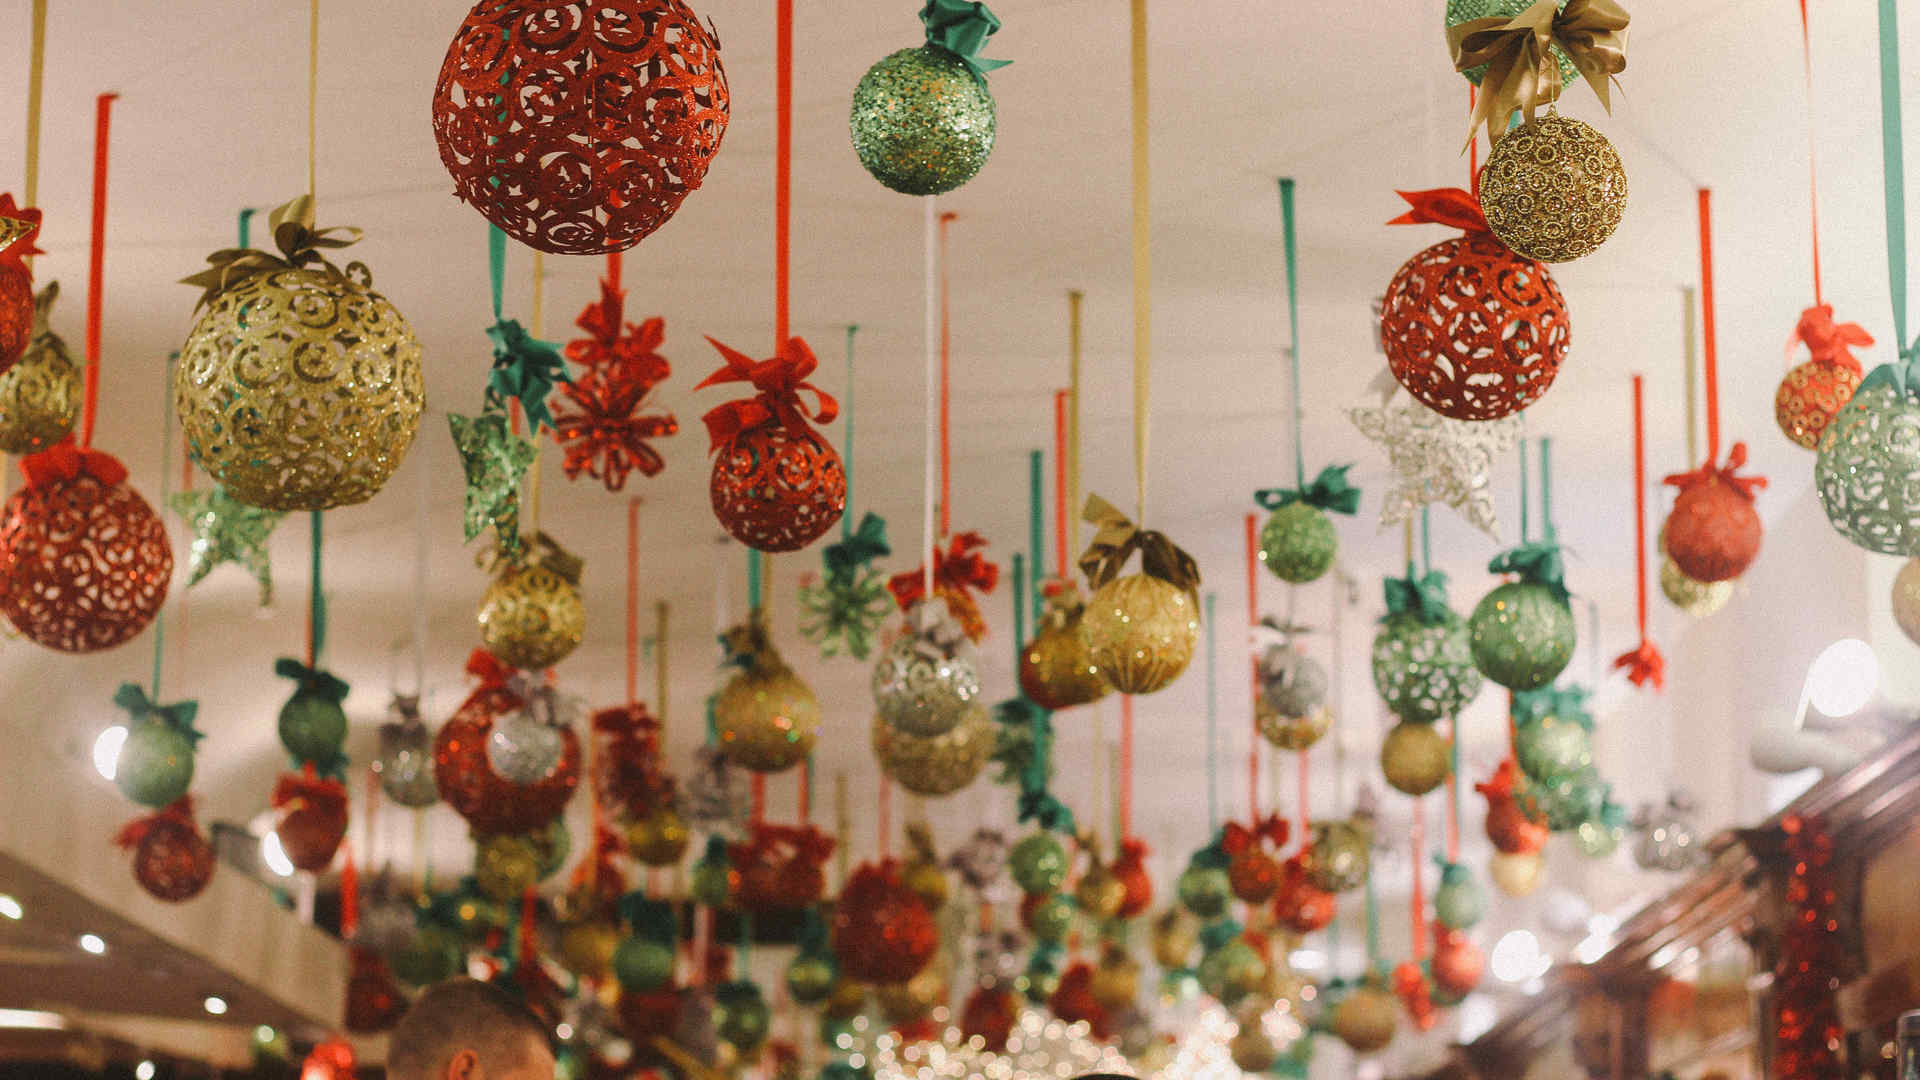 Holiday ornaments hanging from a ceiling